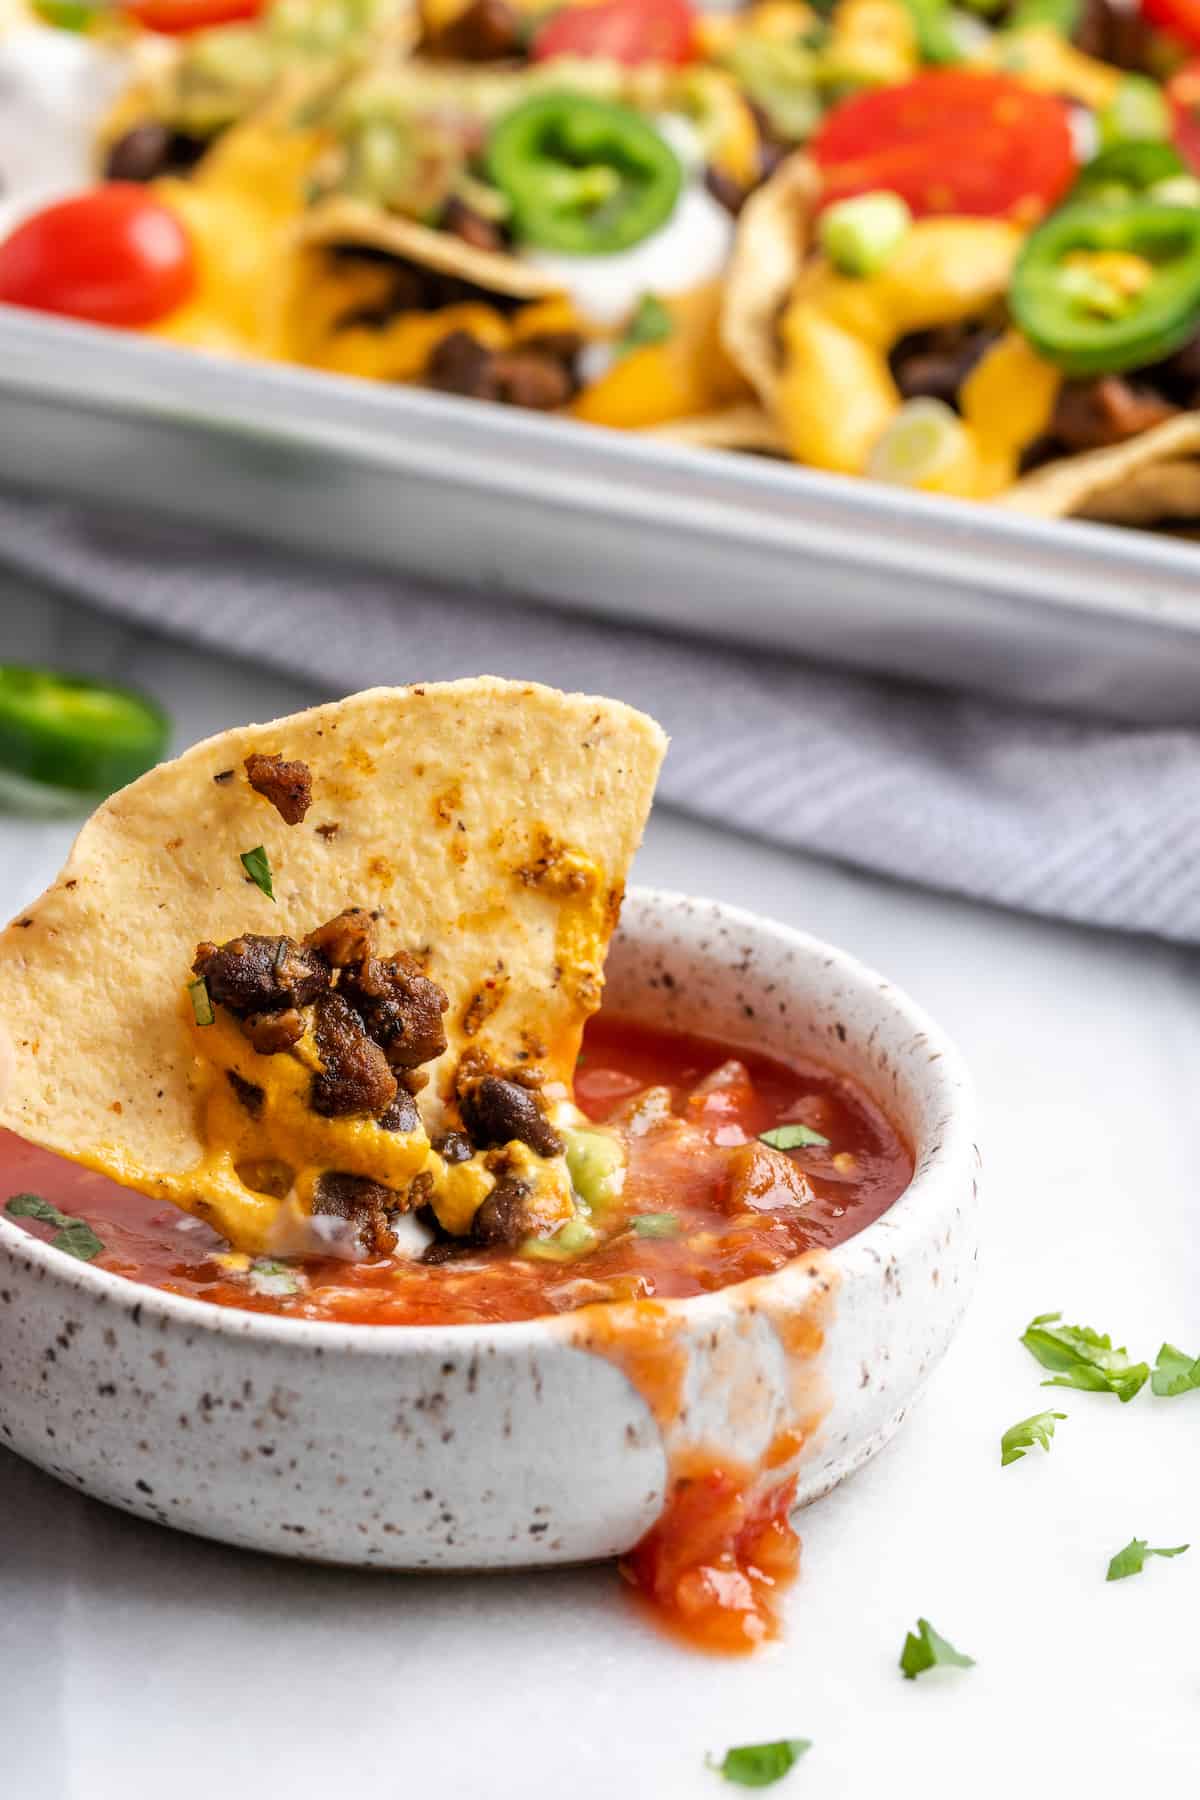 A chip with beans and cheese on it dipping into a bowl of salsa, with a tray of nachos in the background